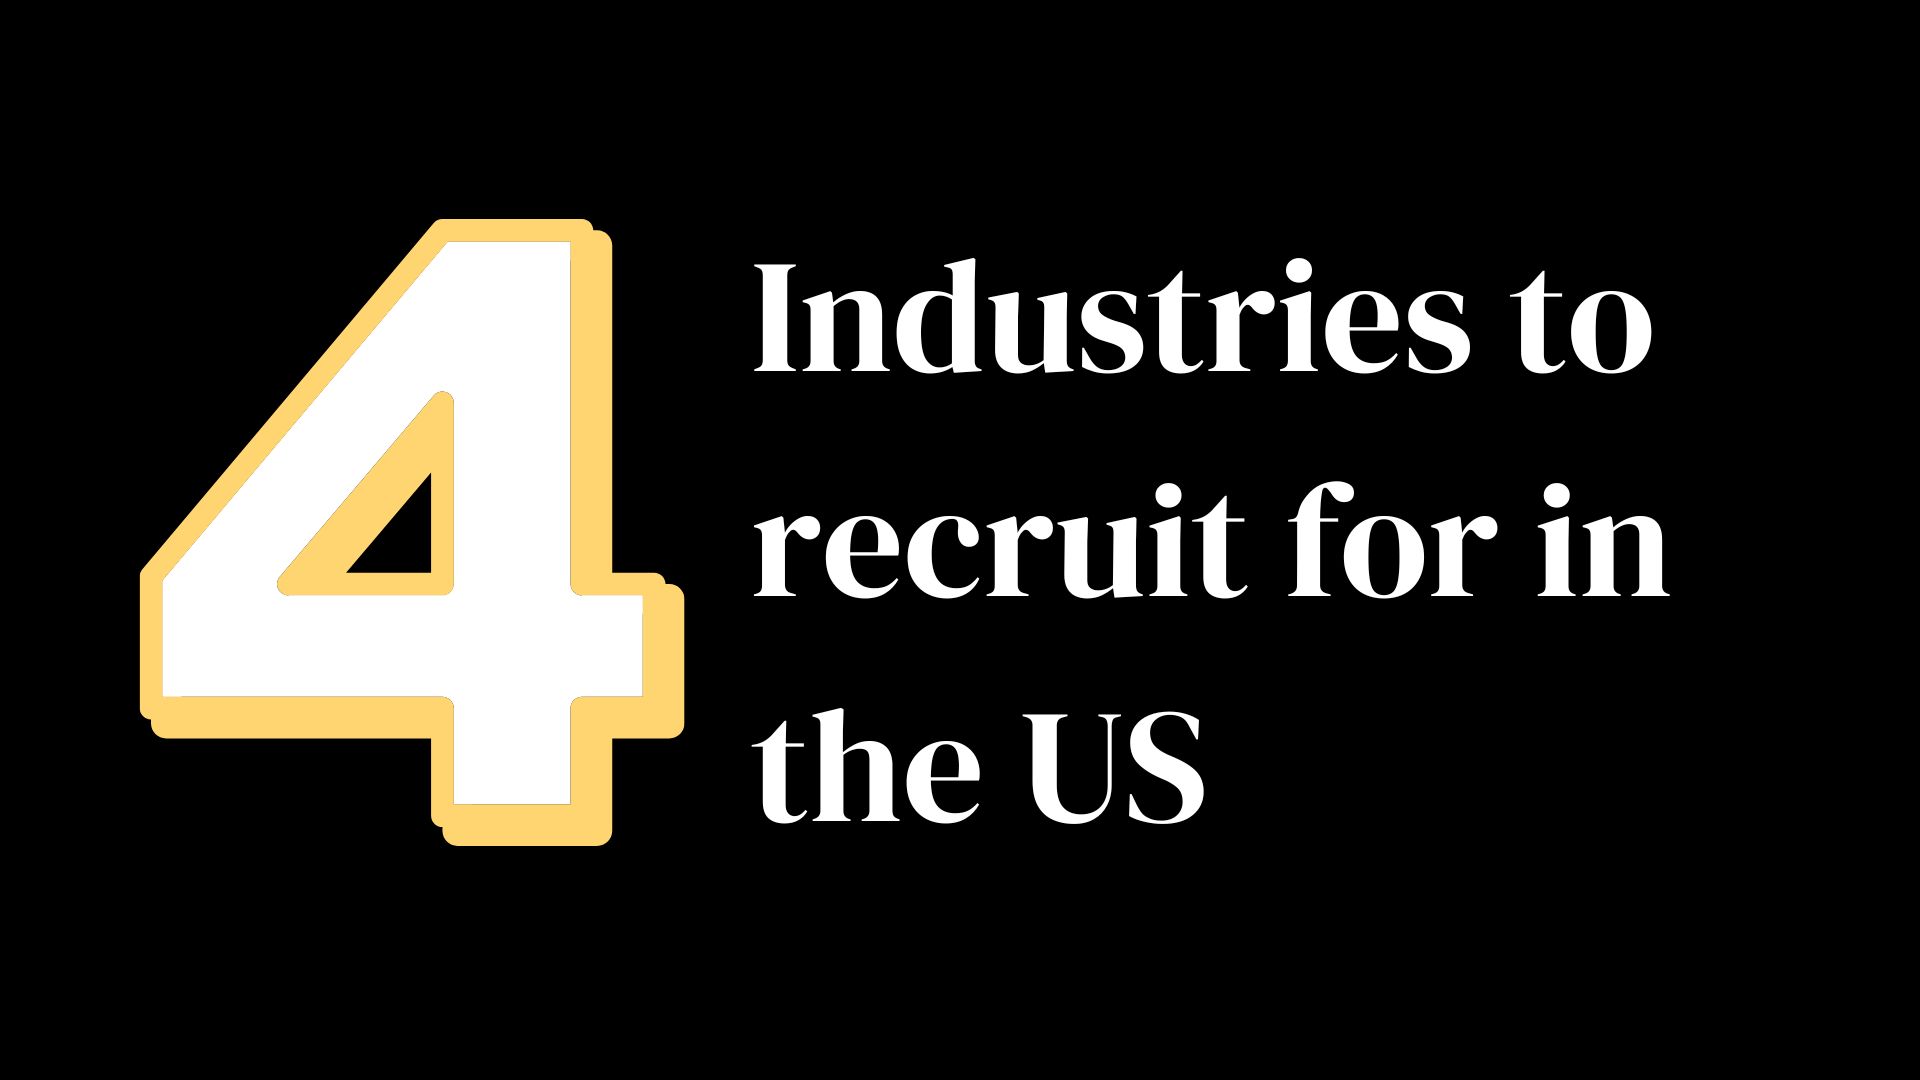 Hottest industries for recruitment in the US